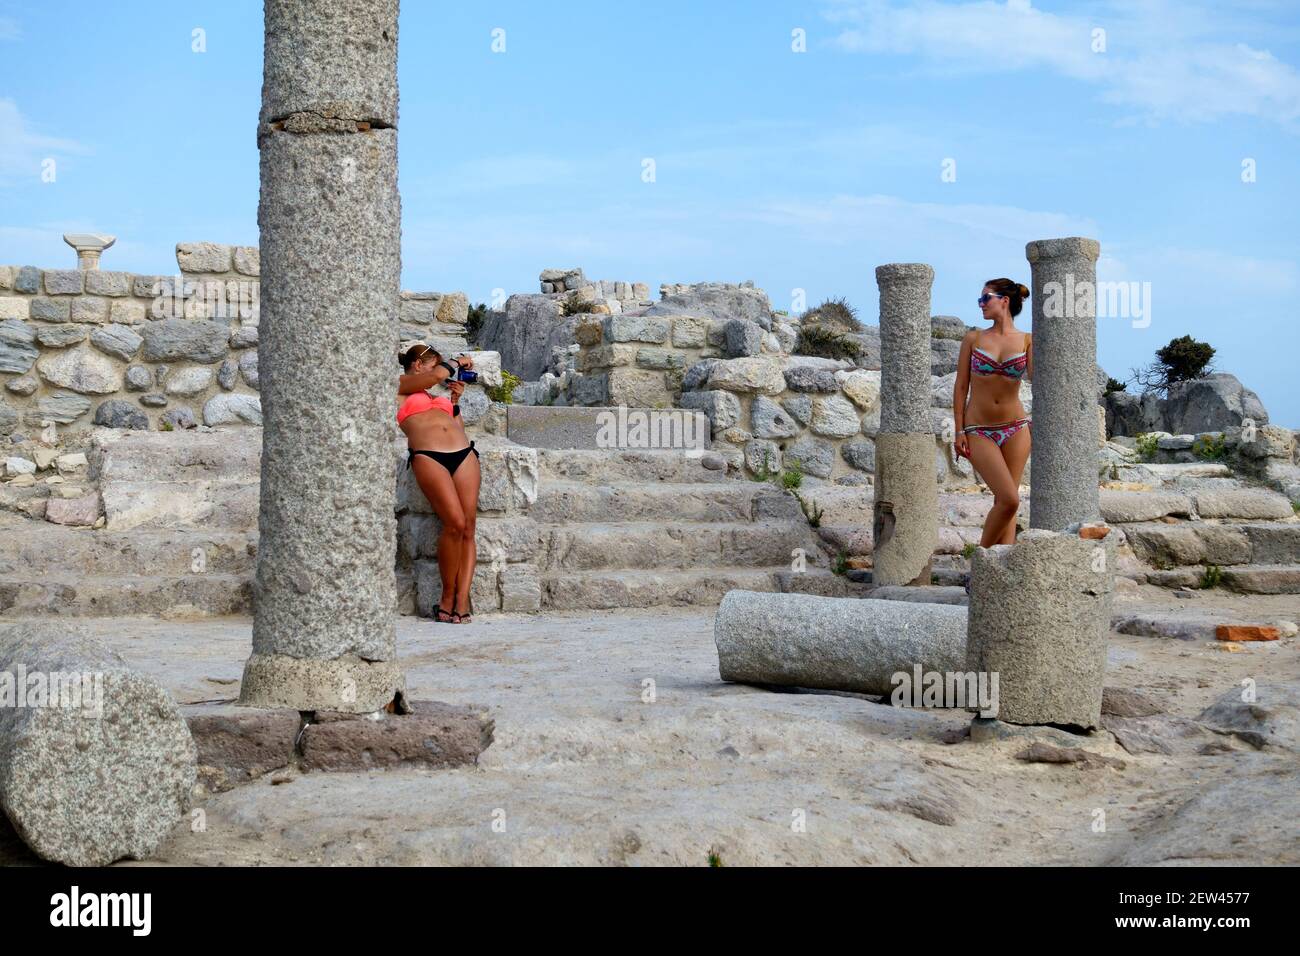 Girl in a bikini posing and getting her photograph taken in the ruins of Basilica Agios Stefanos in Kefalos on the Greek island of Kos Stock Photo